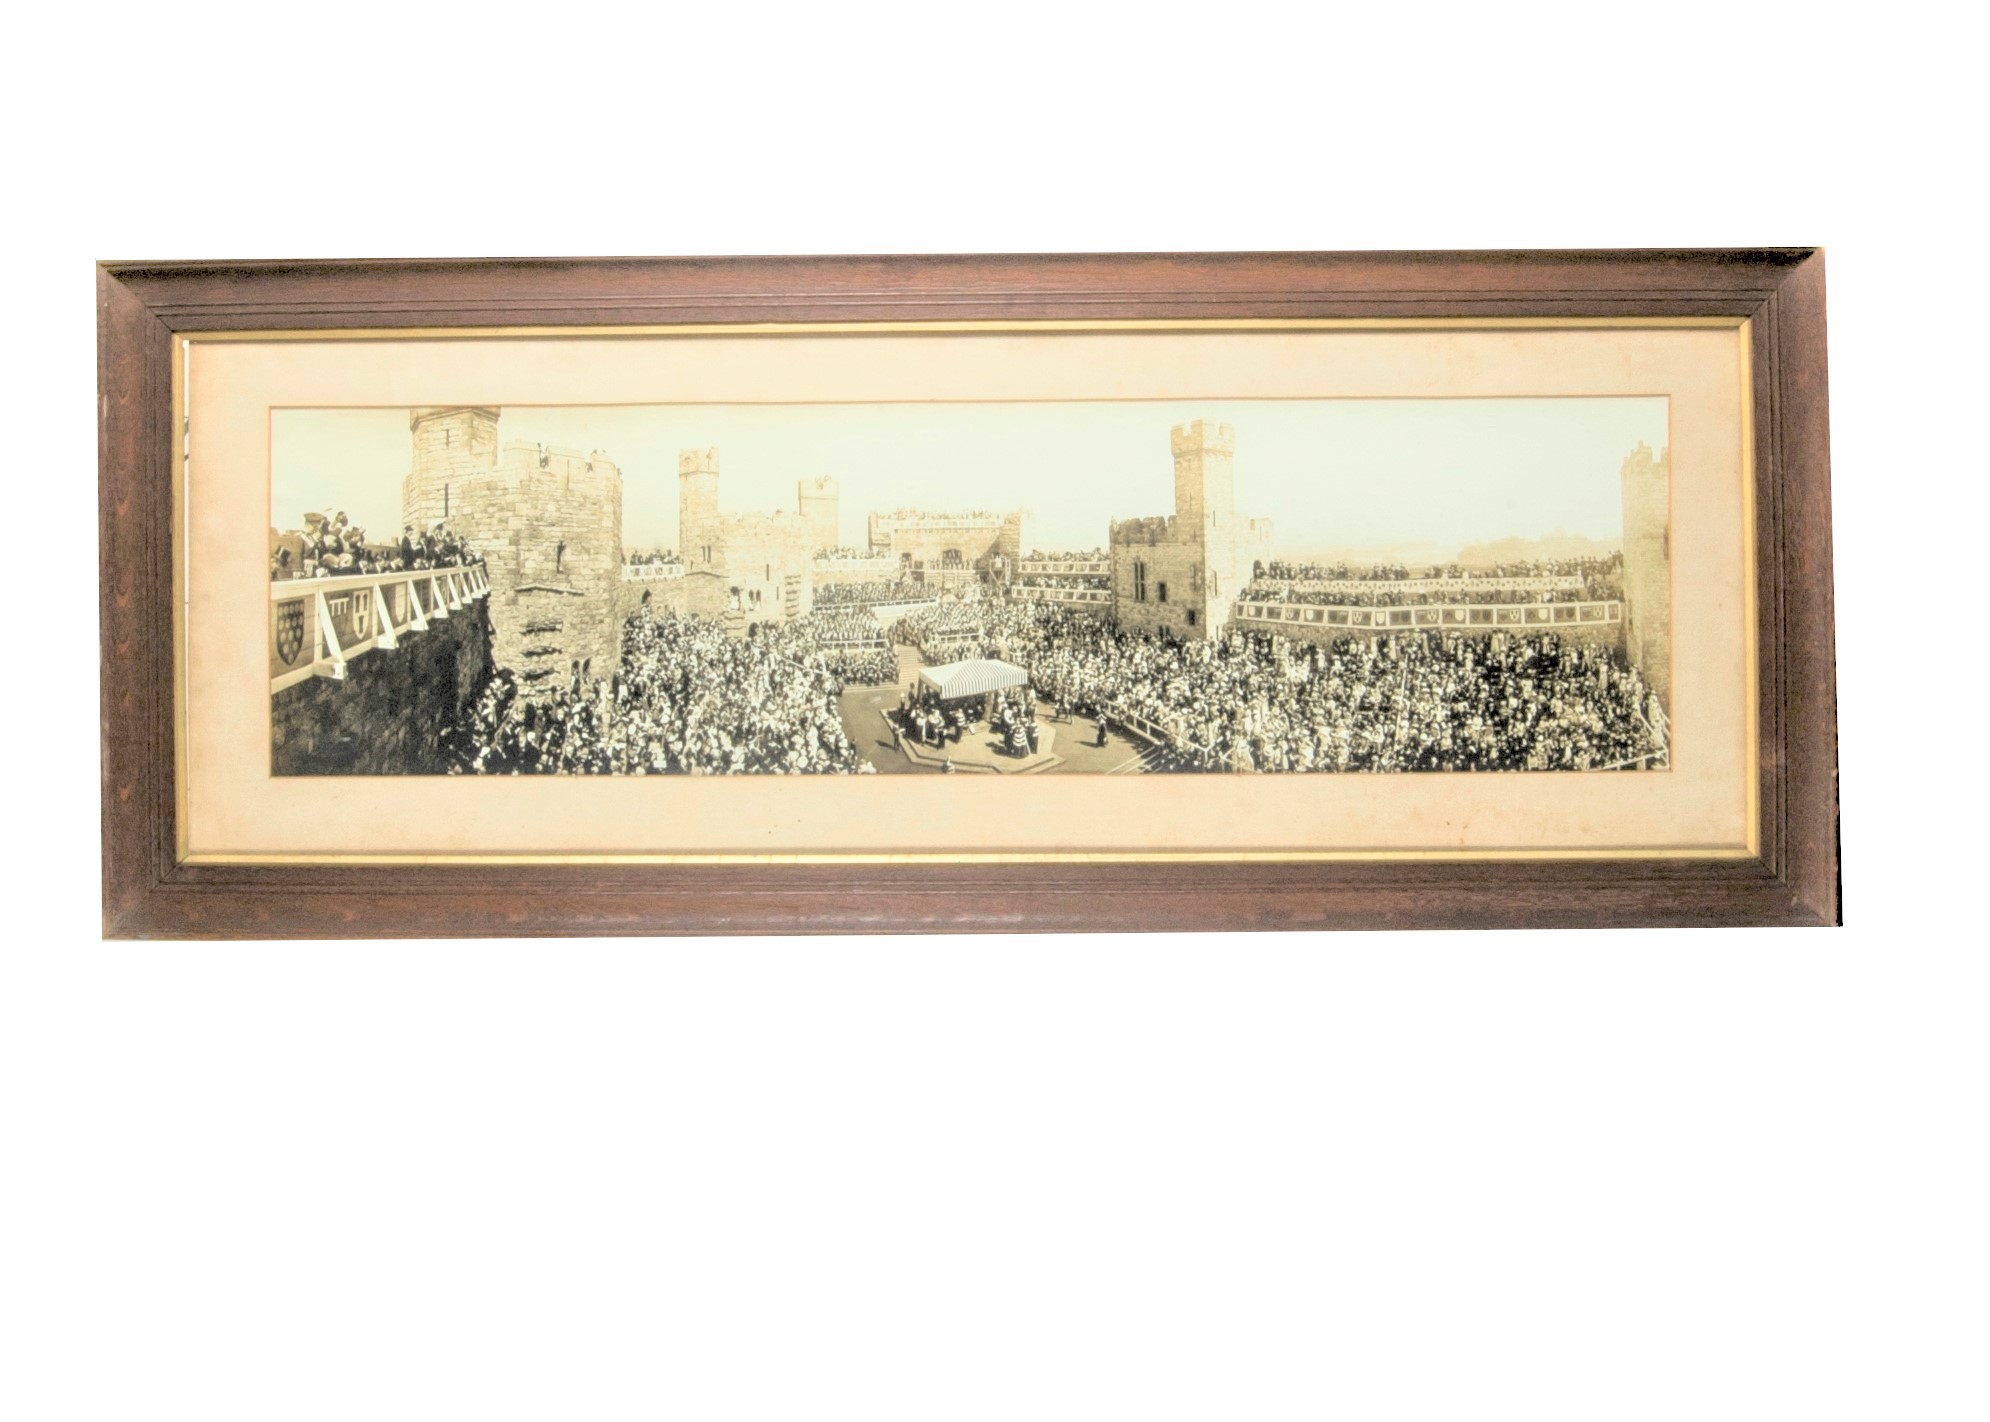 A Gelatin Silver Panoramic Print of The Investiture of Edward Prince of Wales at Caernarfon Castle